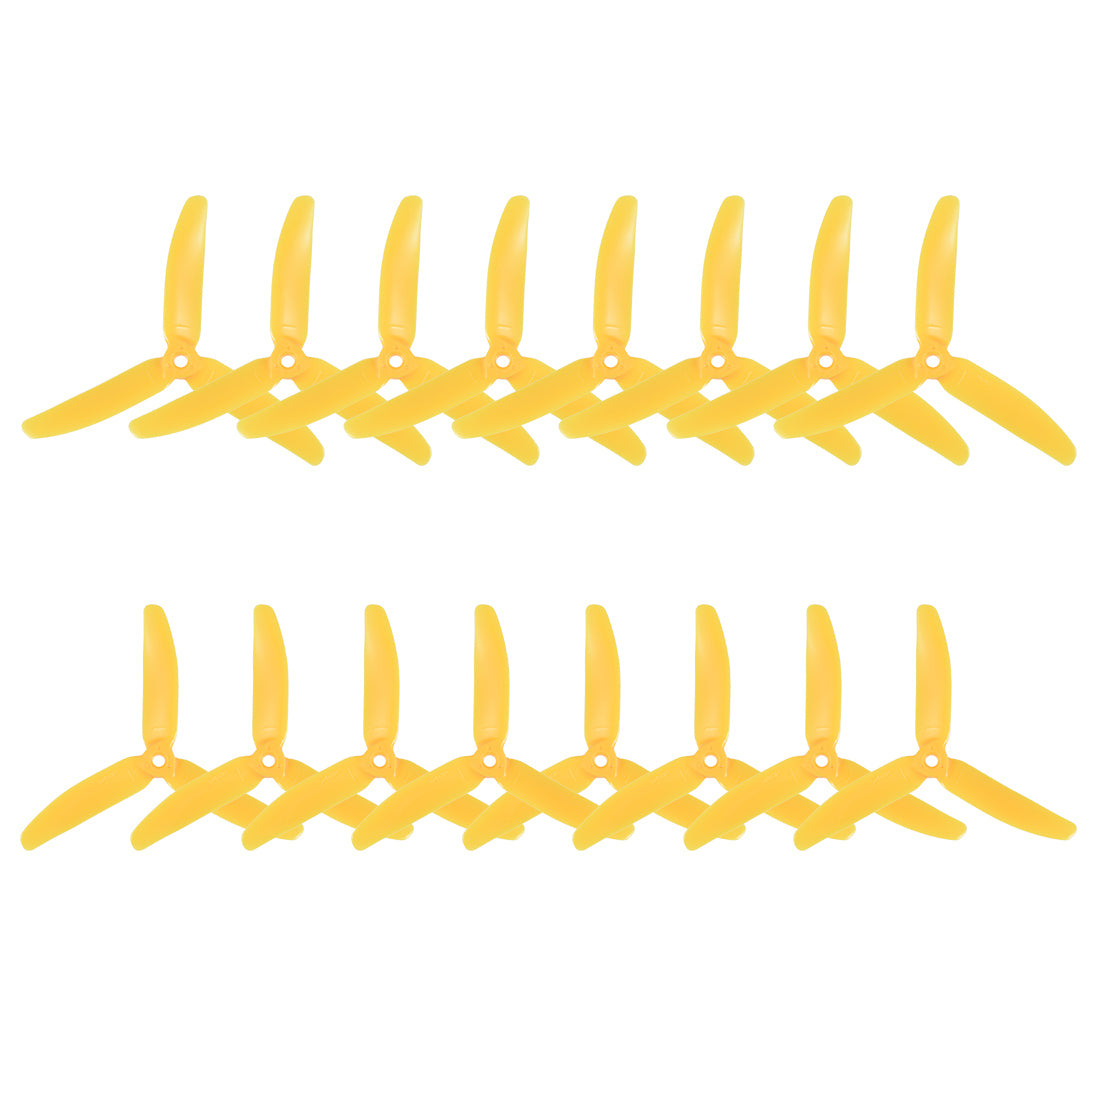 uxcell Uxcell RC Propellers 5040 5x4 Inch 3-Vane Multi-Rotor for Aircraft Toy, Nylon Yellow 8 Pairs